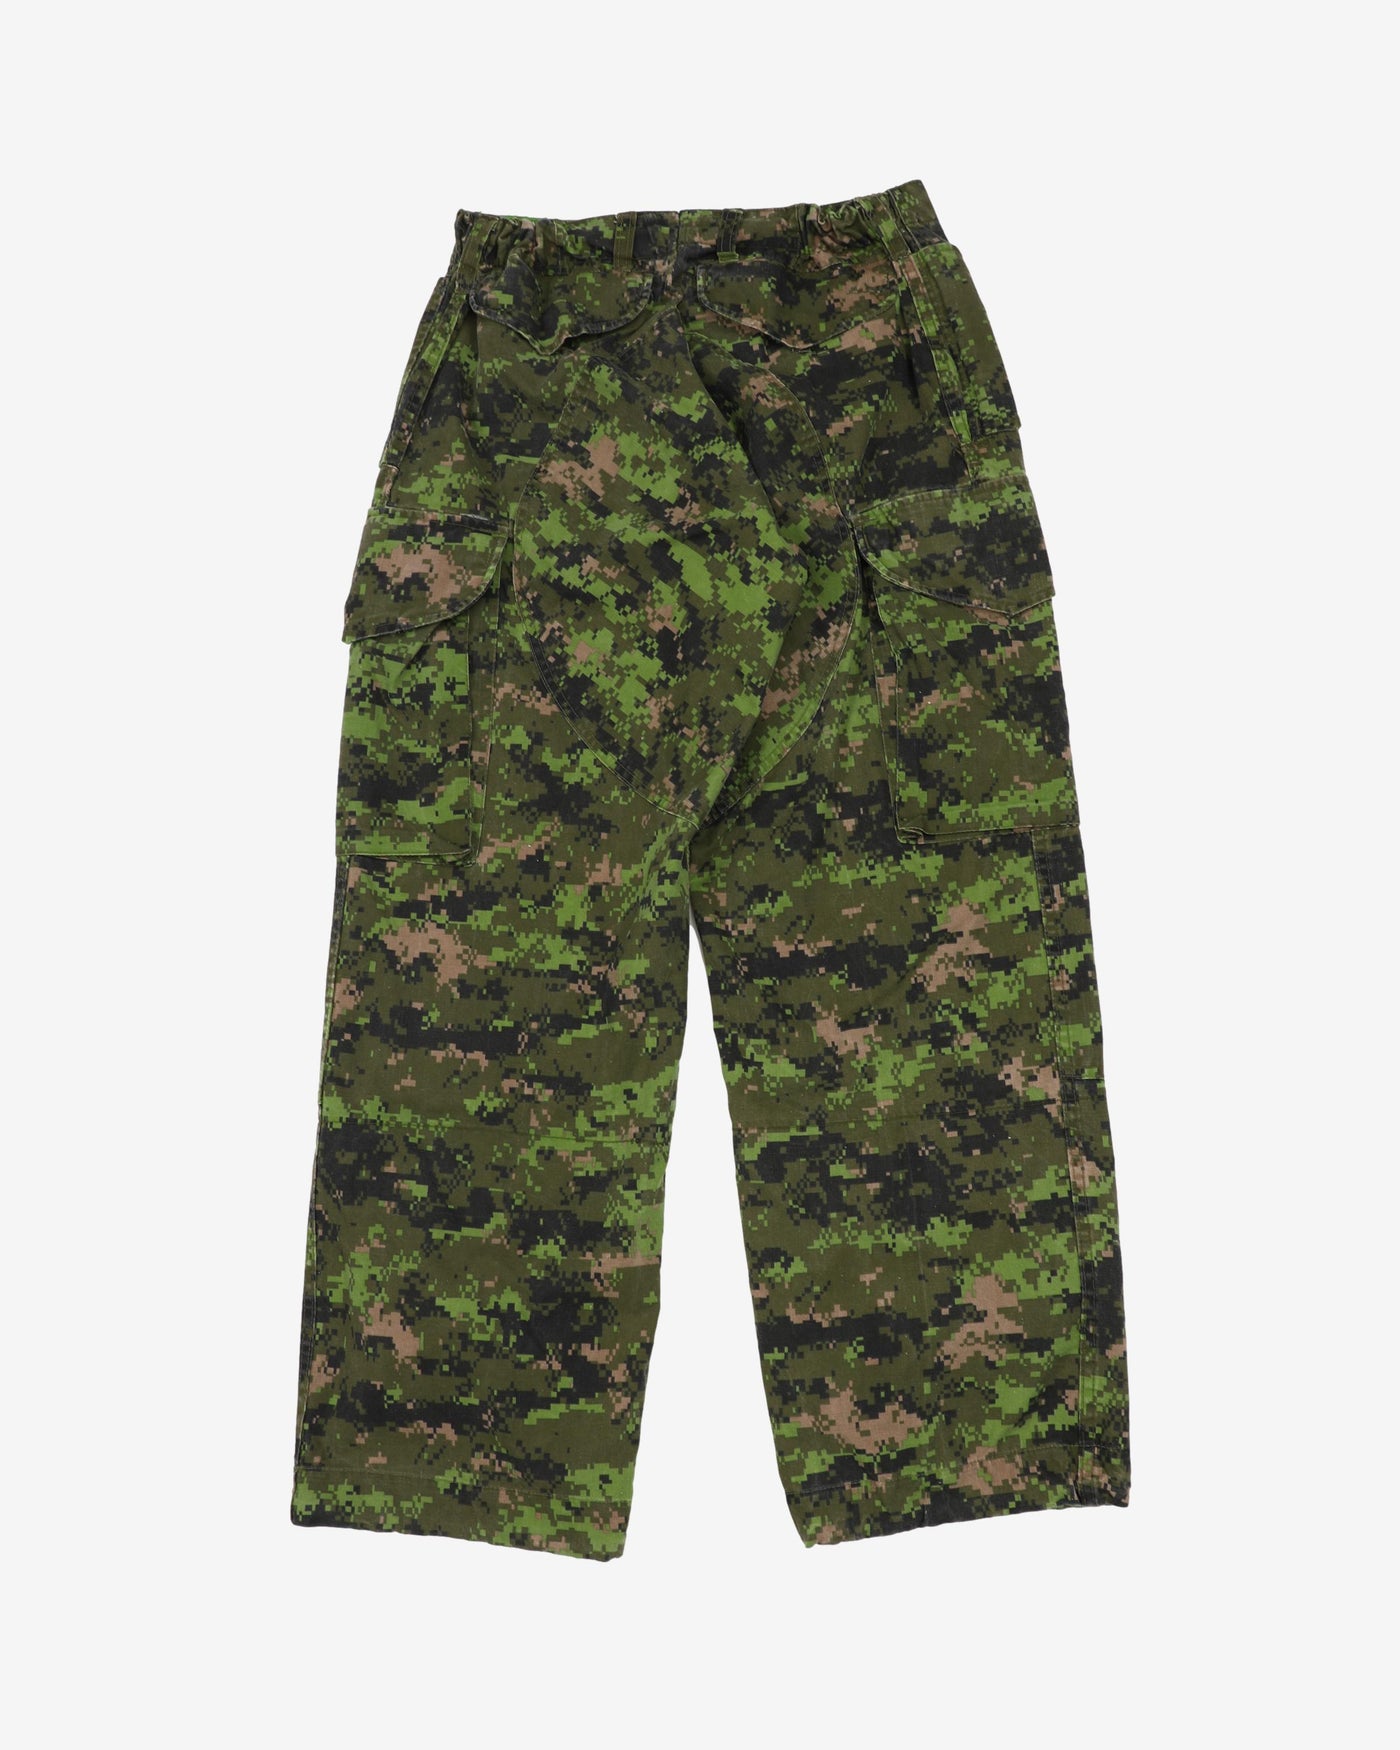 2010s Canadian Army CADPAT Camo Combat Trousers - 32x30